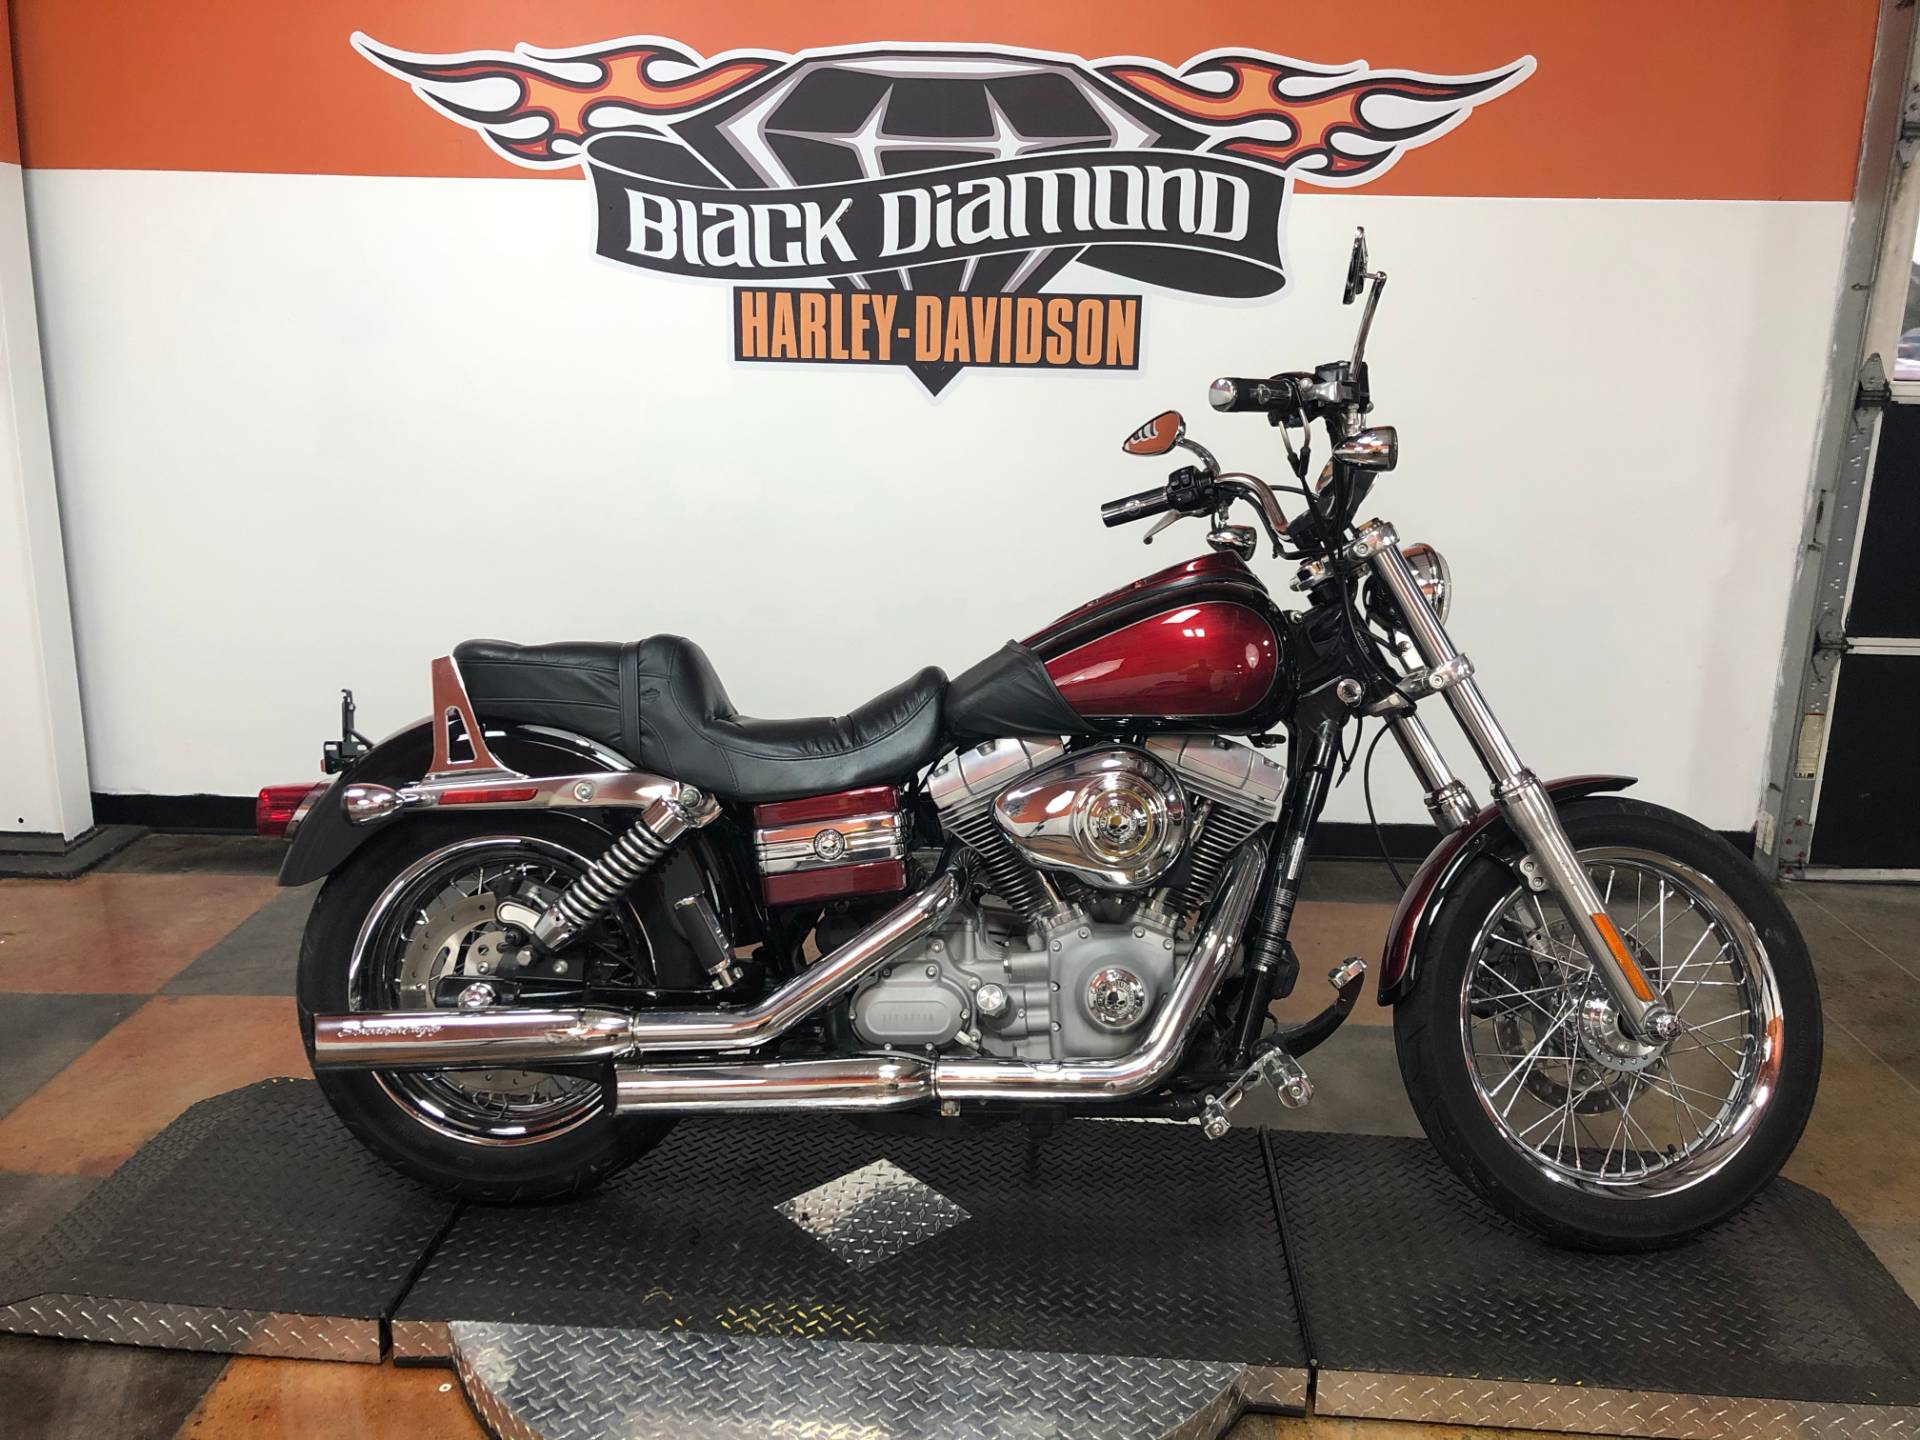 Used 2009 Harley Davidson Dyna Super Glide Custom Red Hot Sunglo Motorcycles In Mount Vernon Il U302810